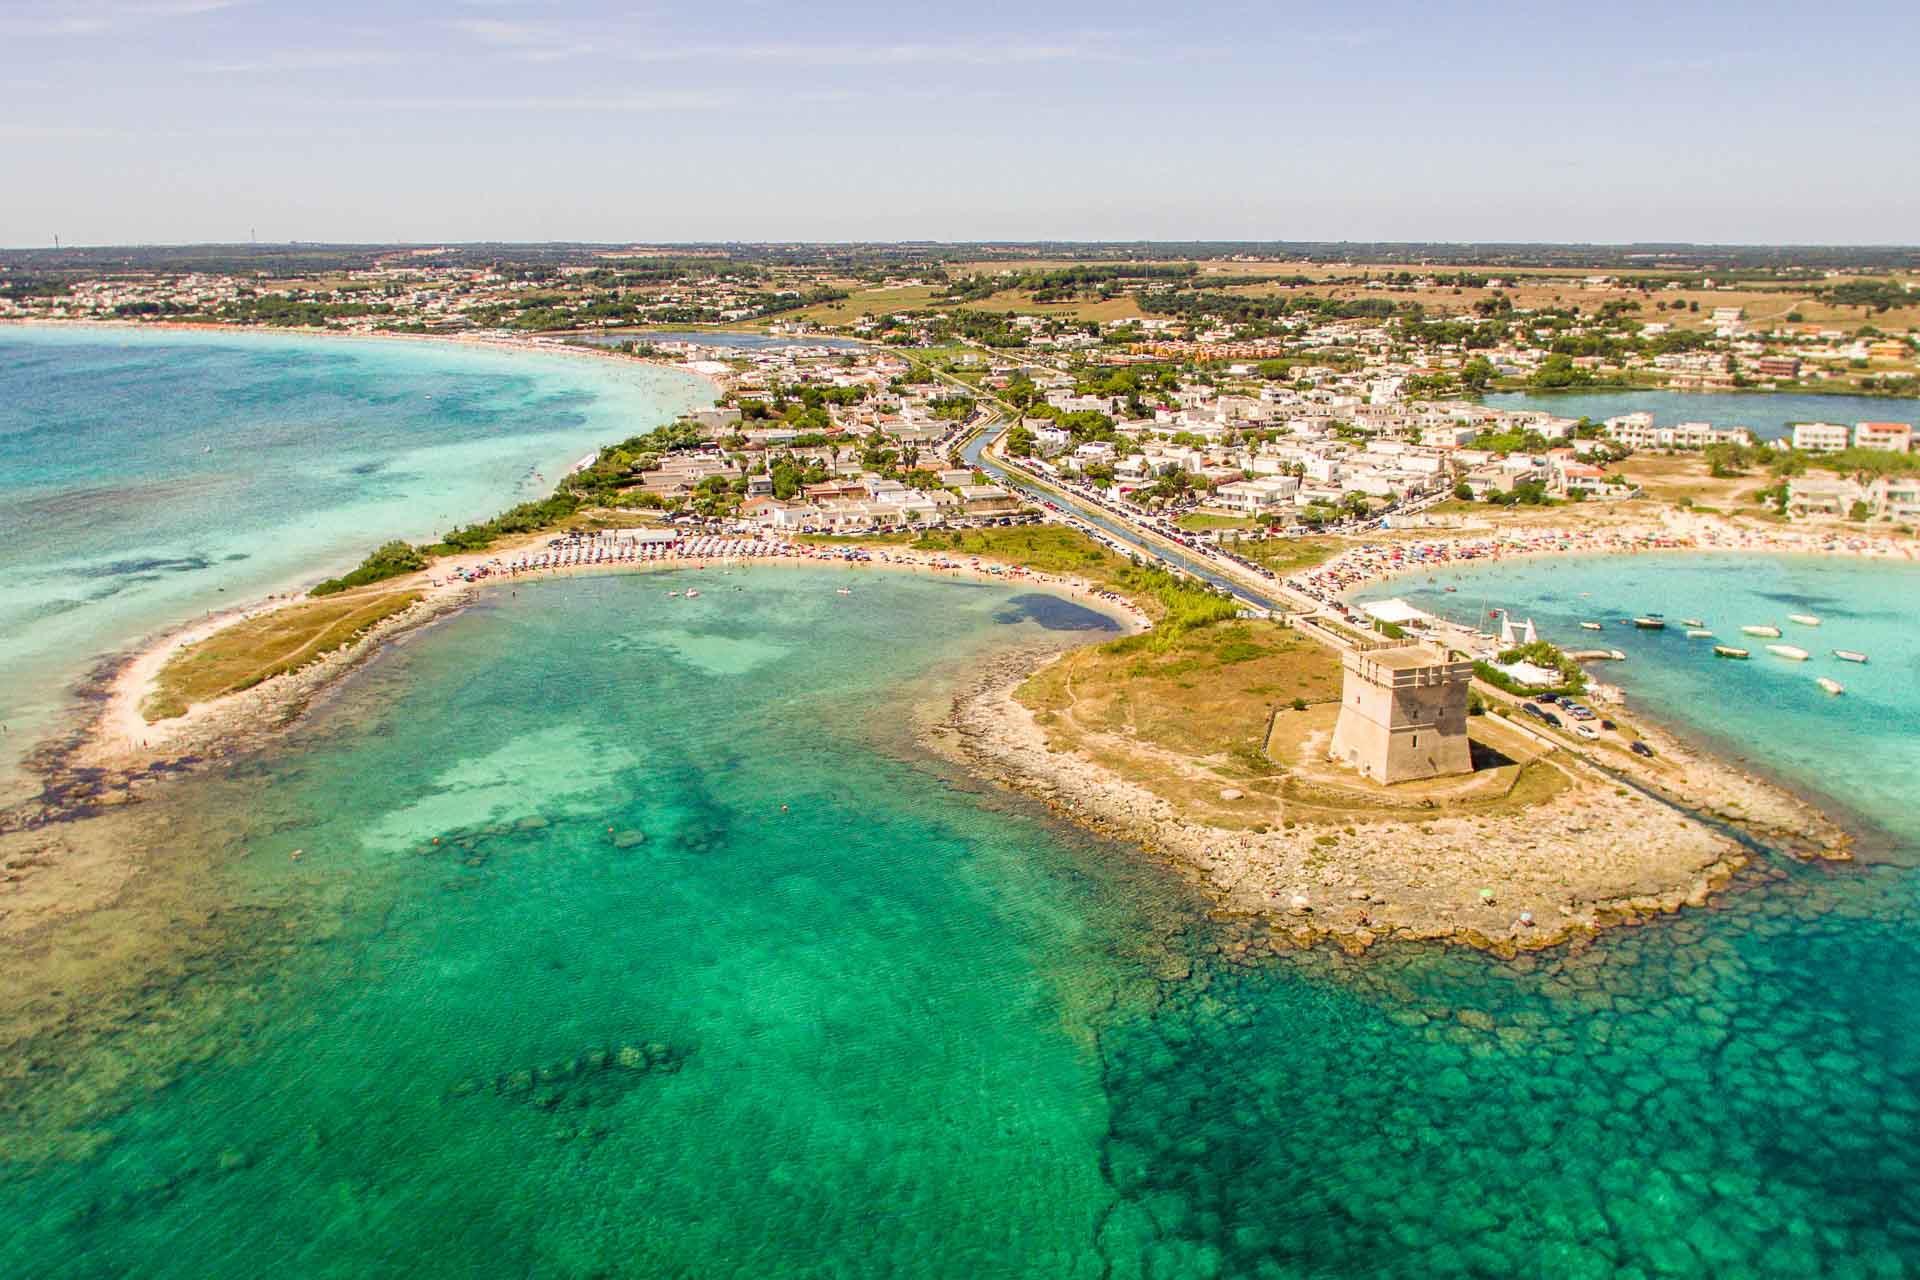 Aerial view of torre Chianca, an islet with a tower surrounded by crystal clear water